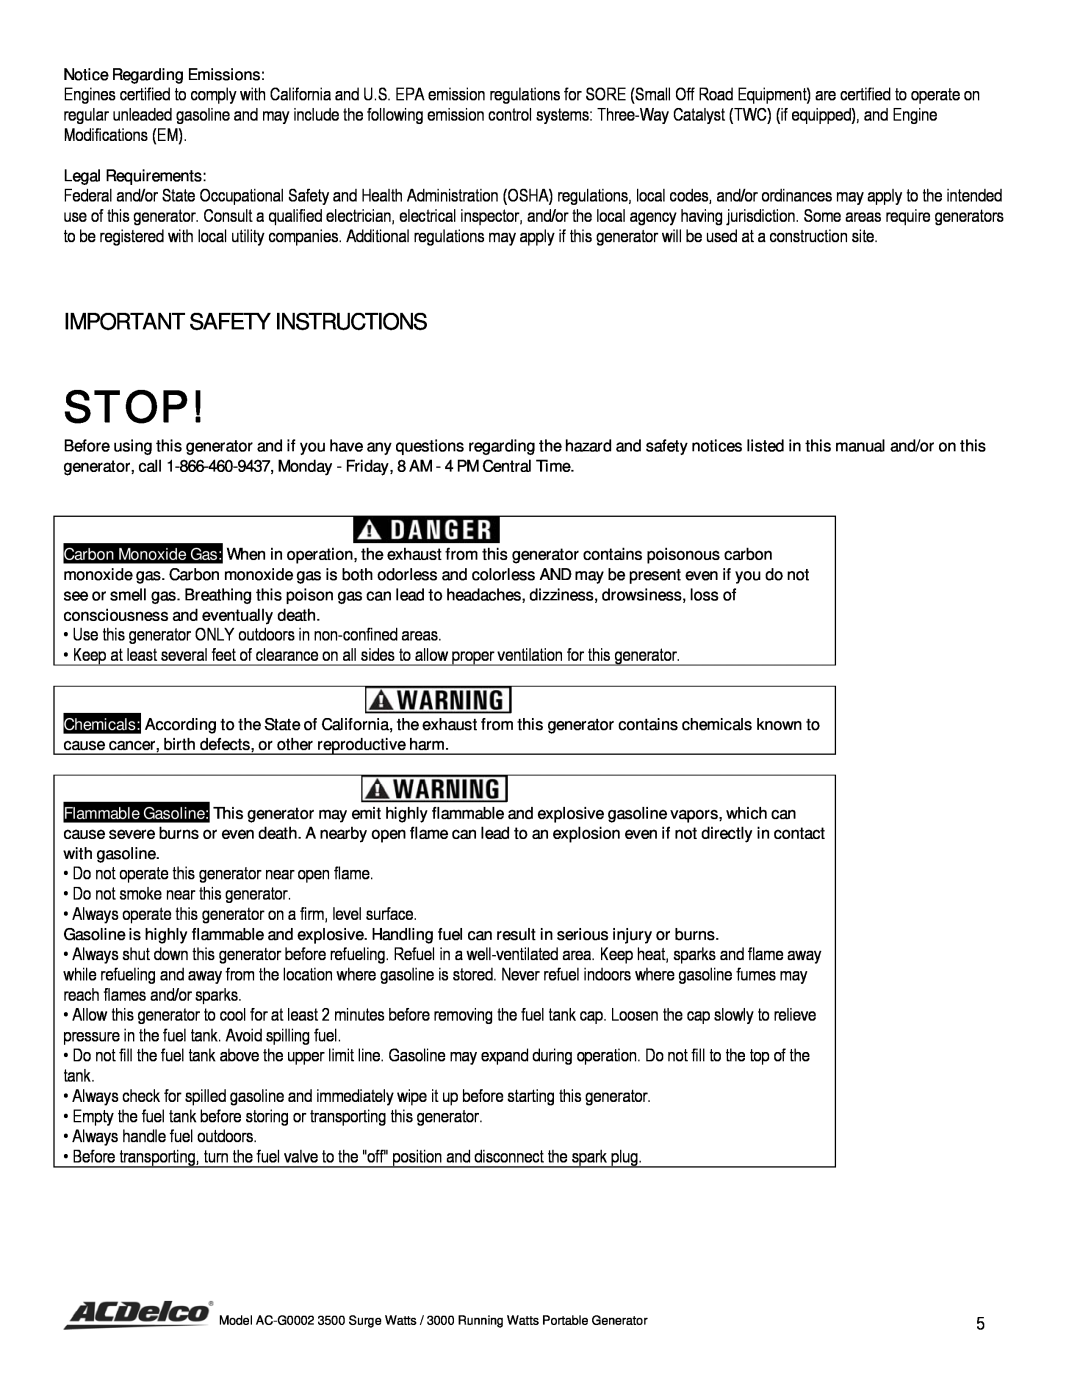 ACDelco AC-G0002 instruction manual Important Safety Instructions, Stop, Notice Regarding Emissions, Legal Requirements 